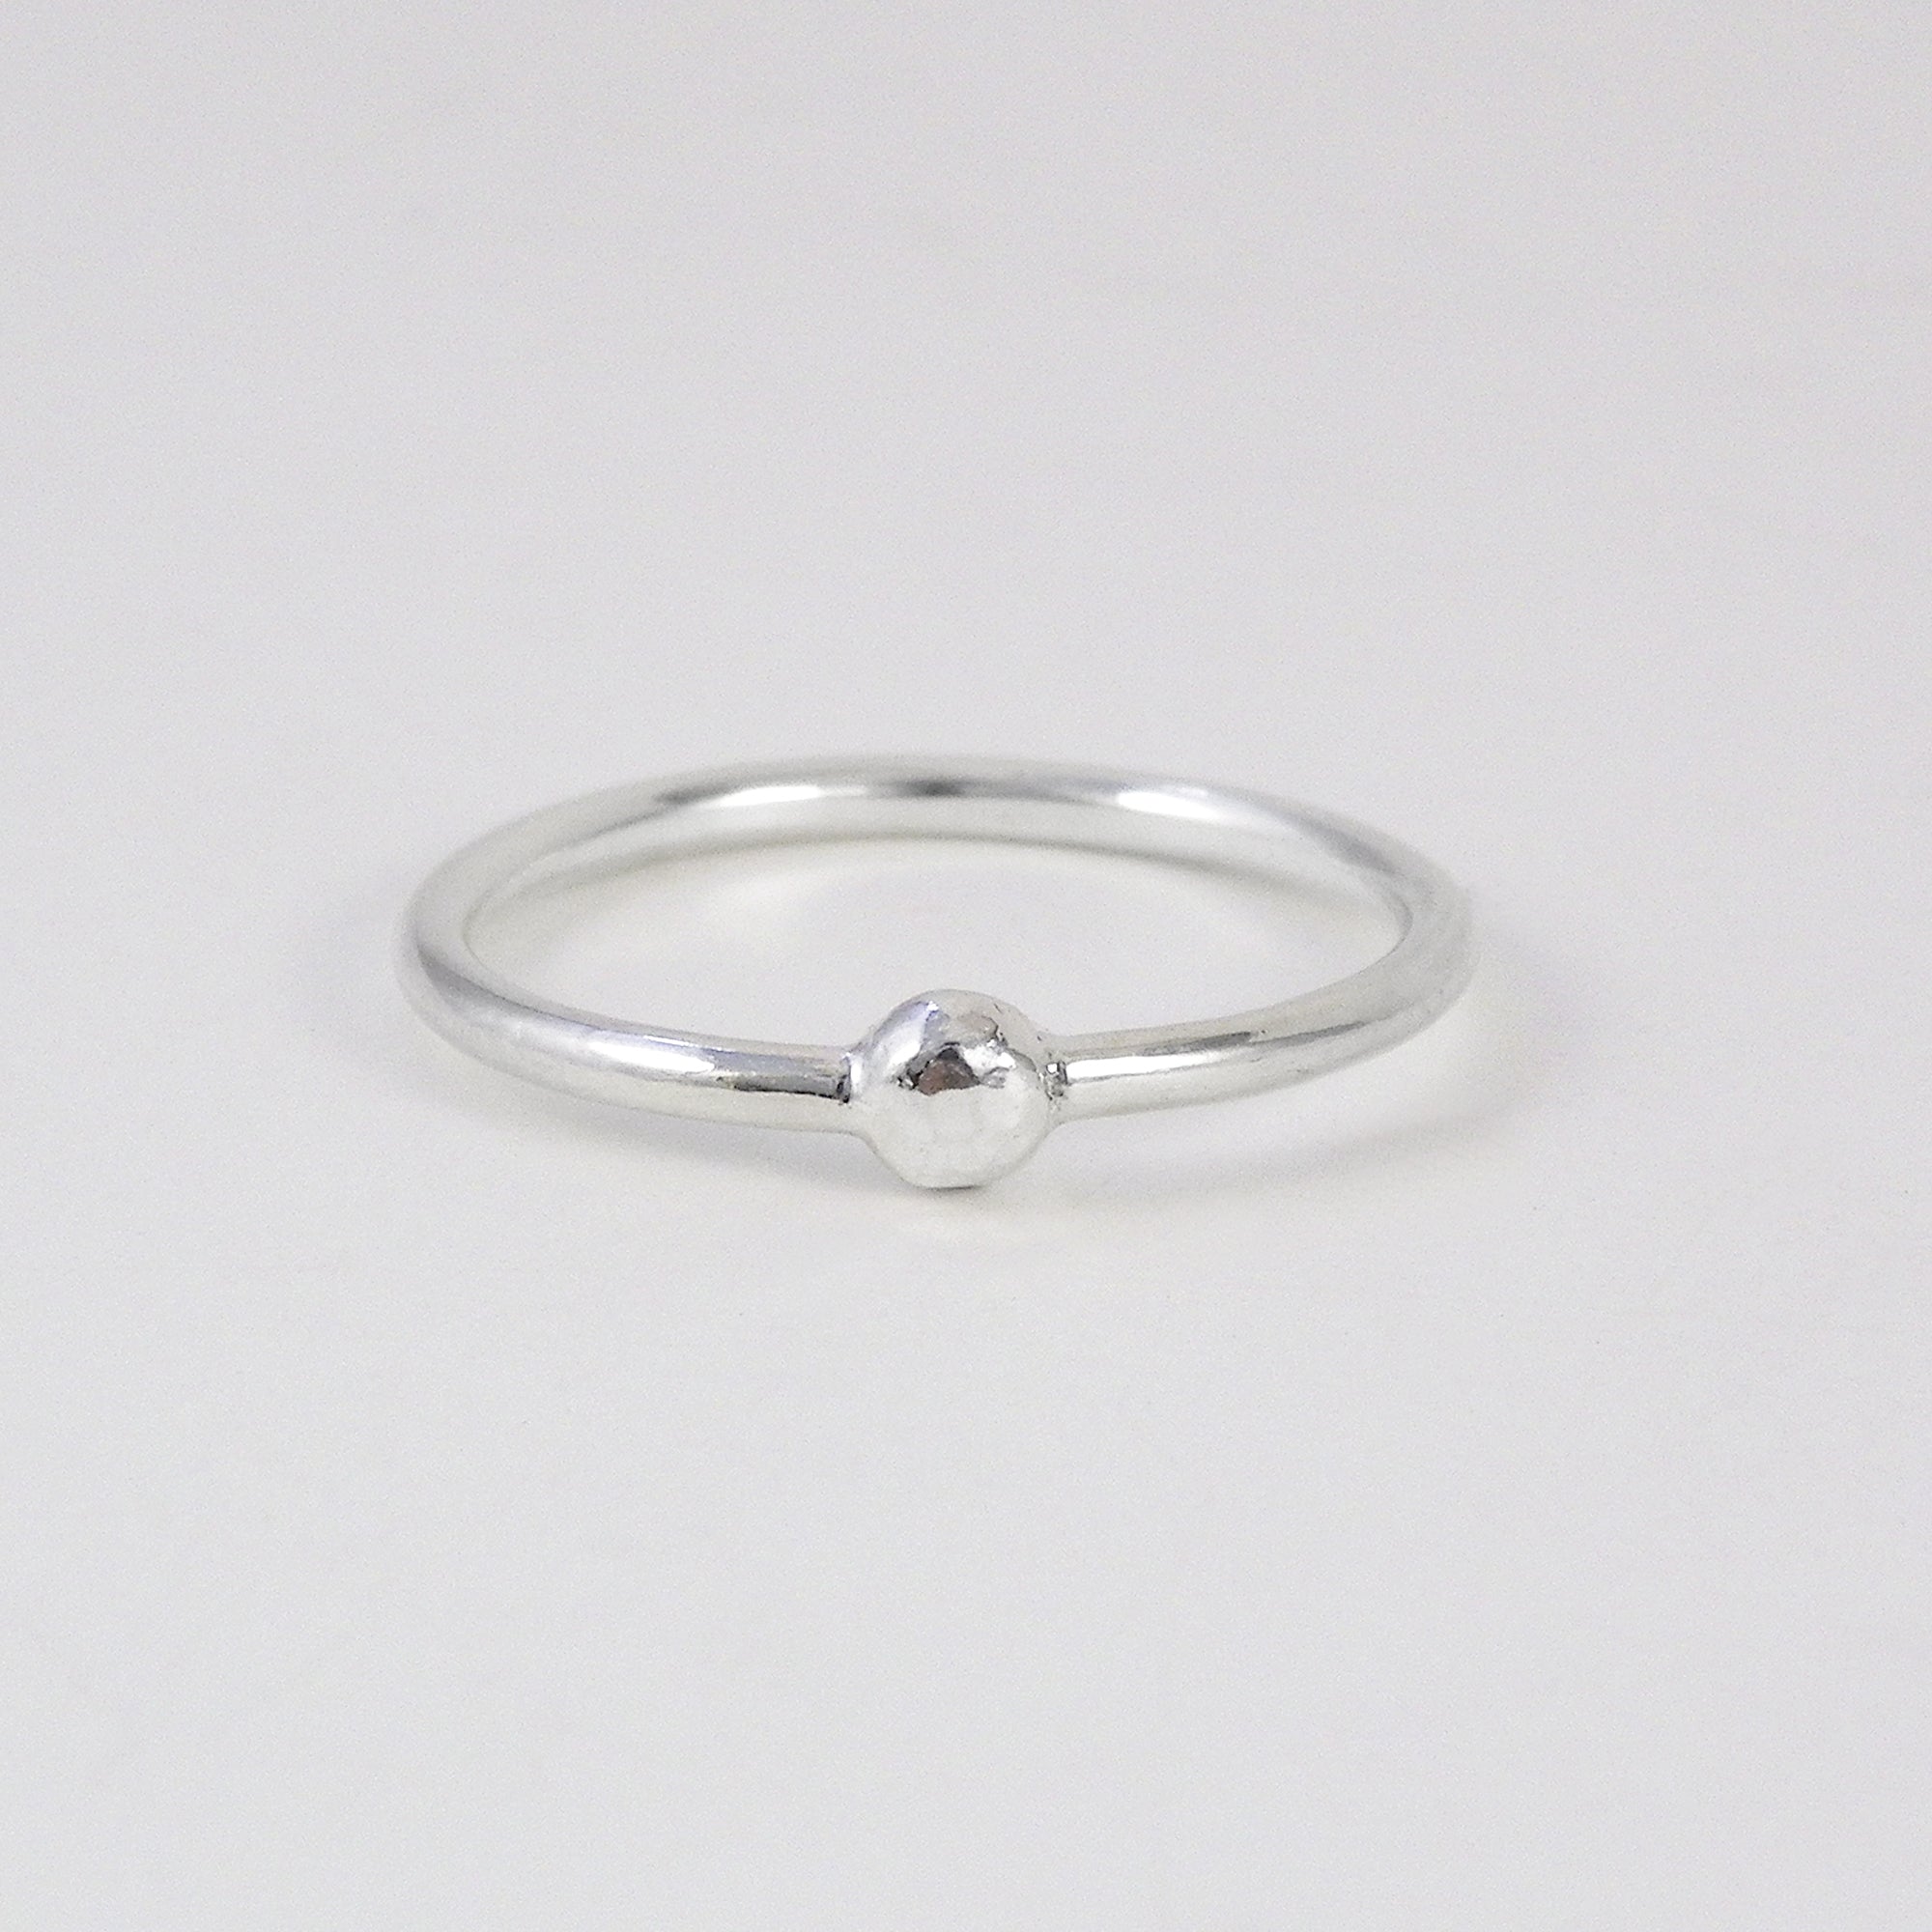 Hammered Ball Ring